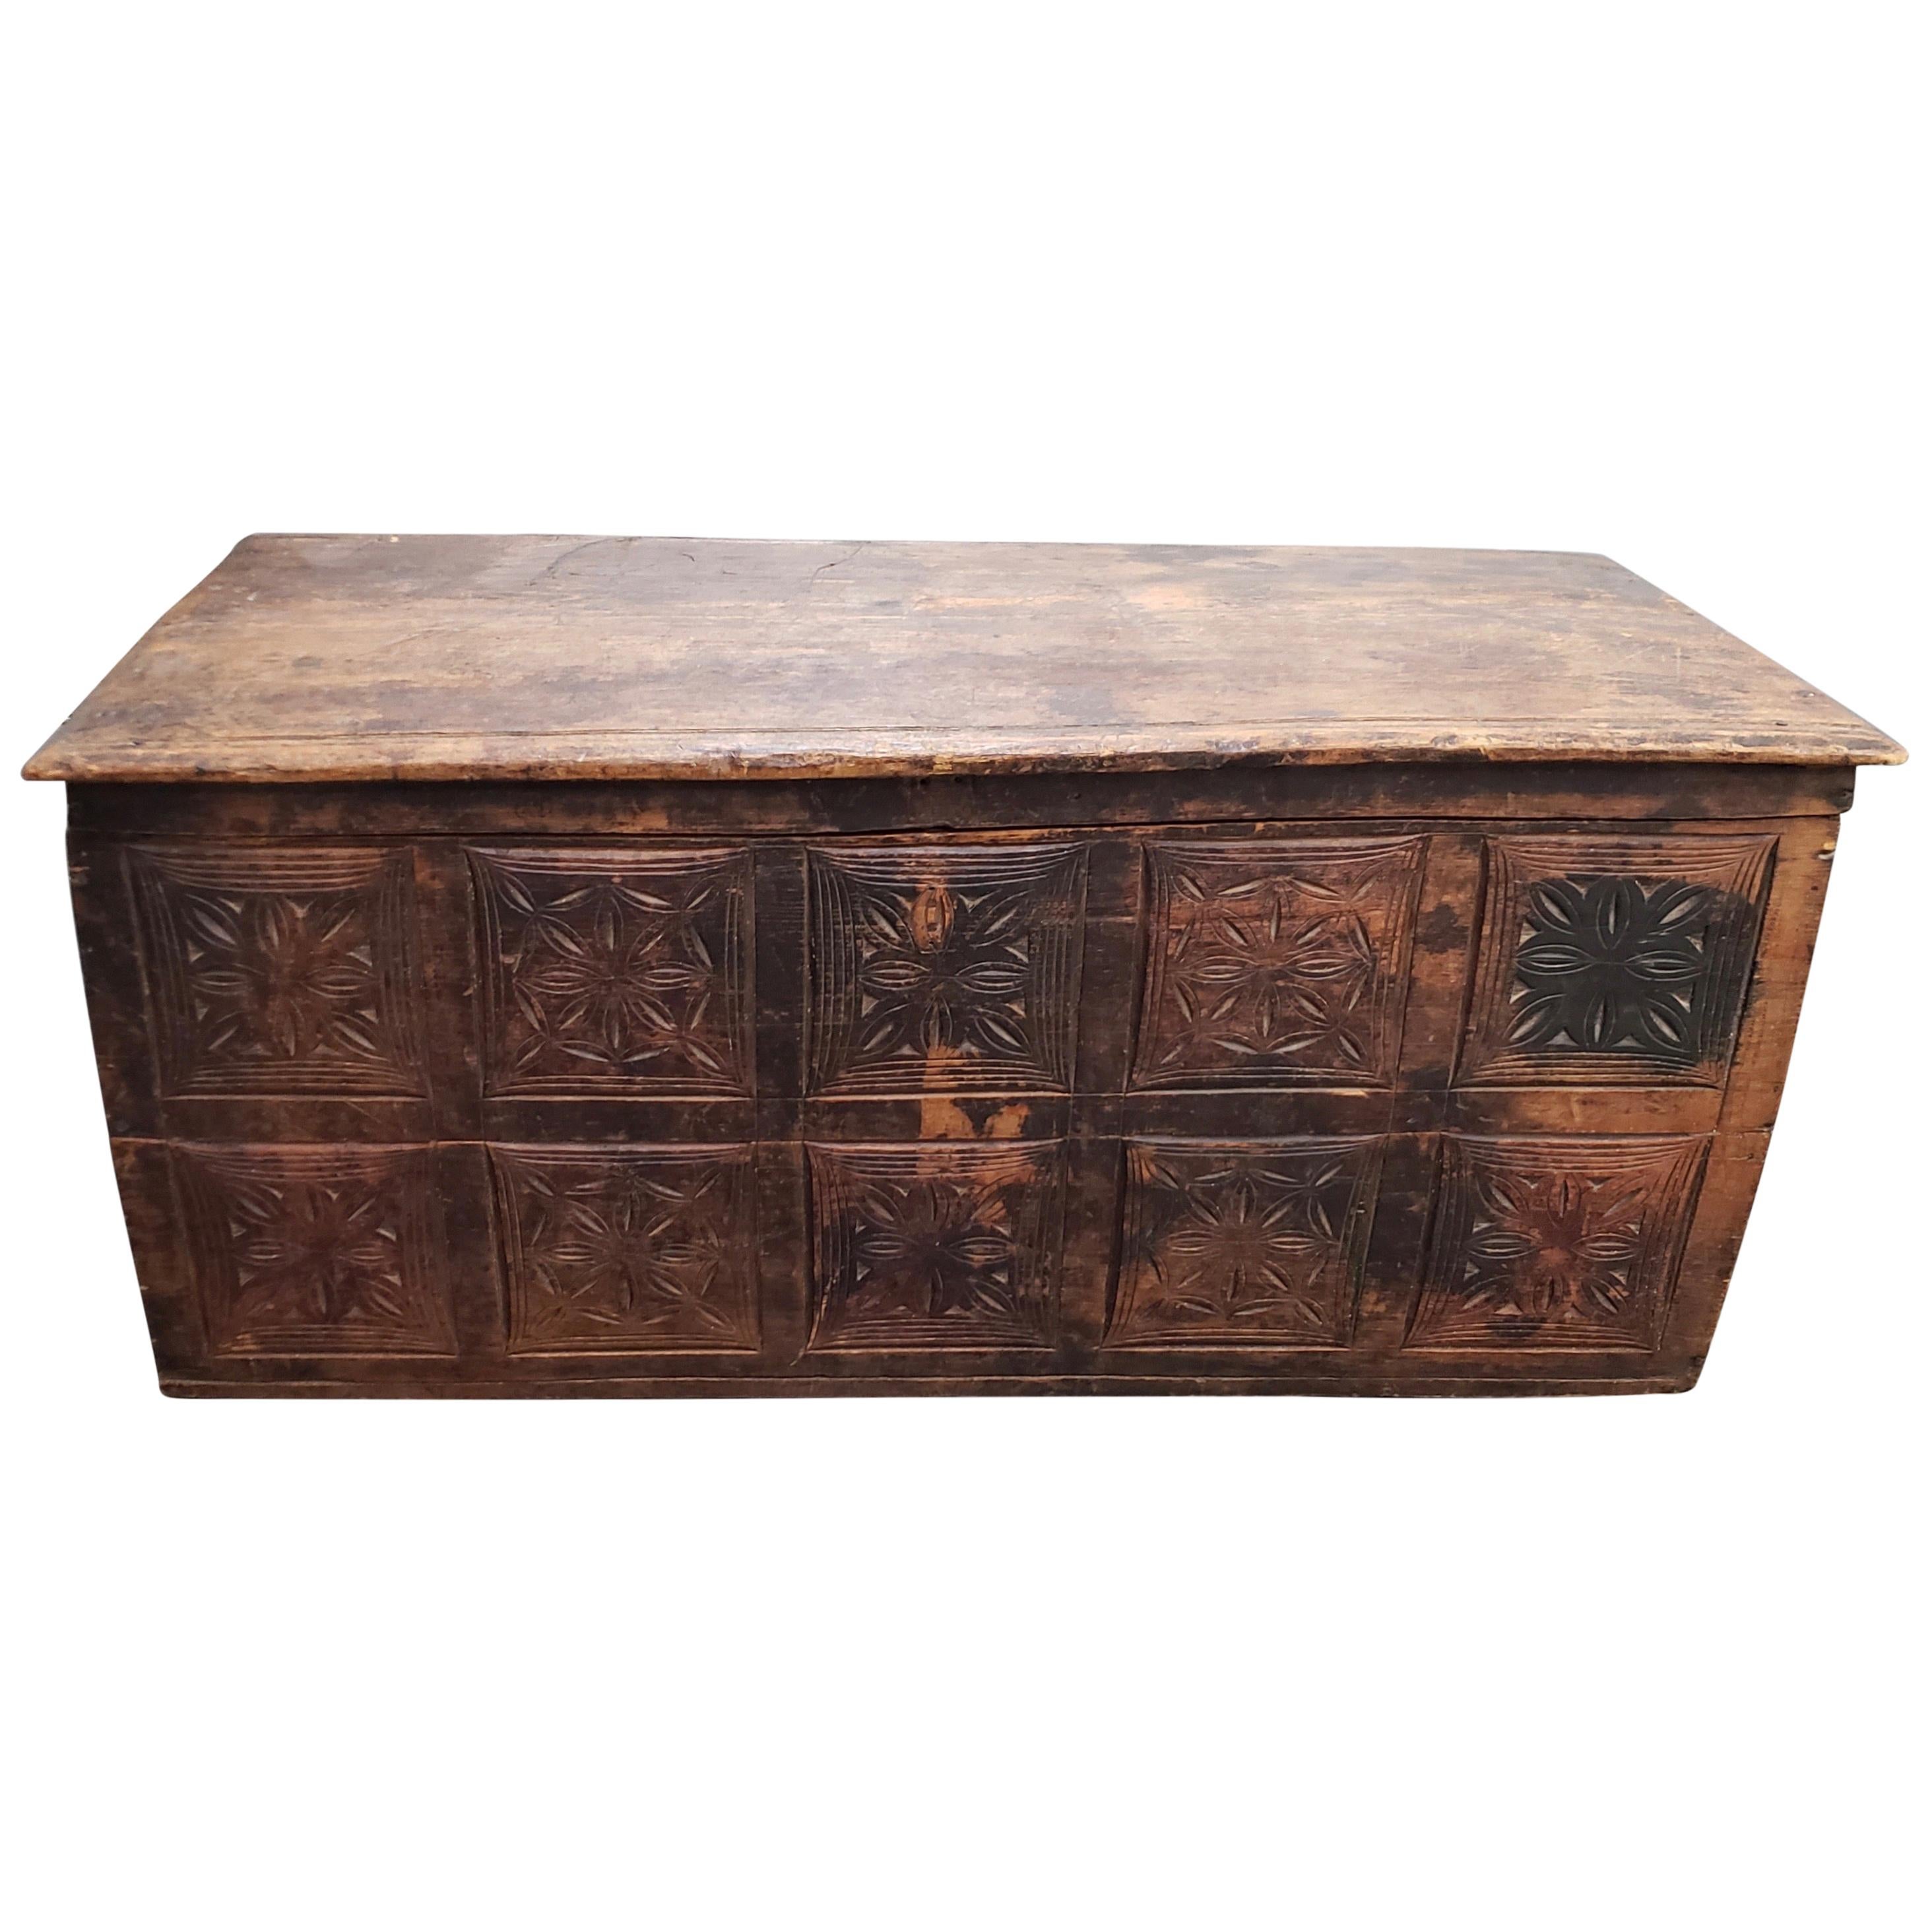 18th Century European Carved Pine Trunk For Sale